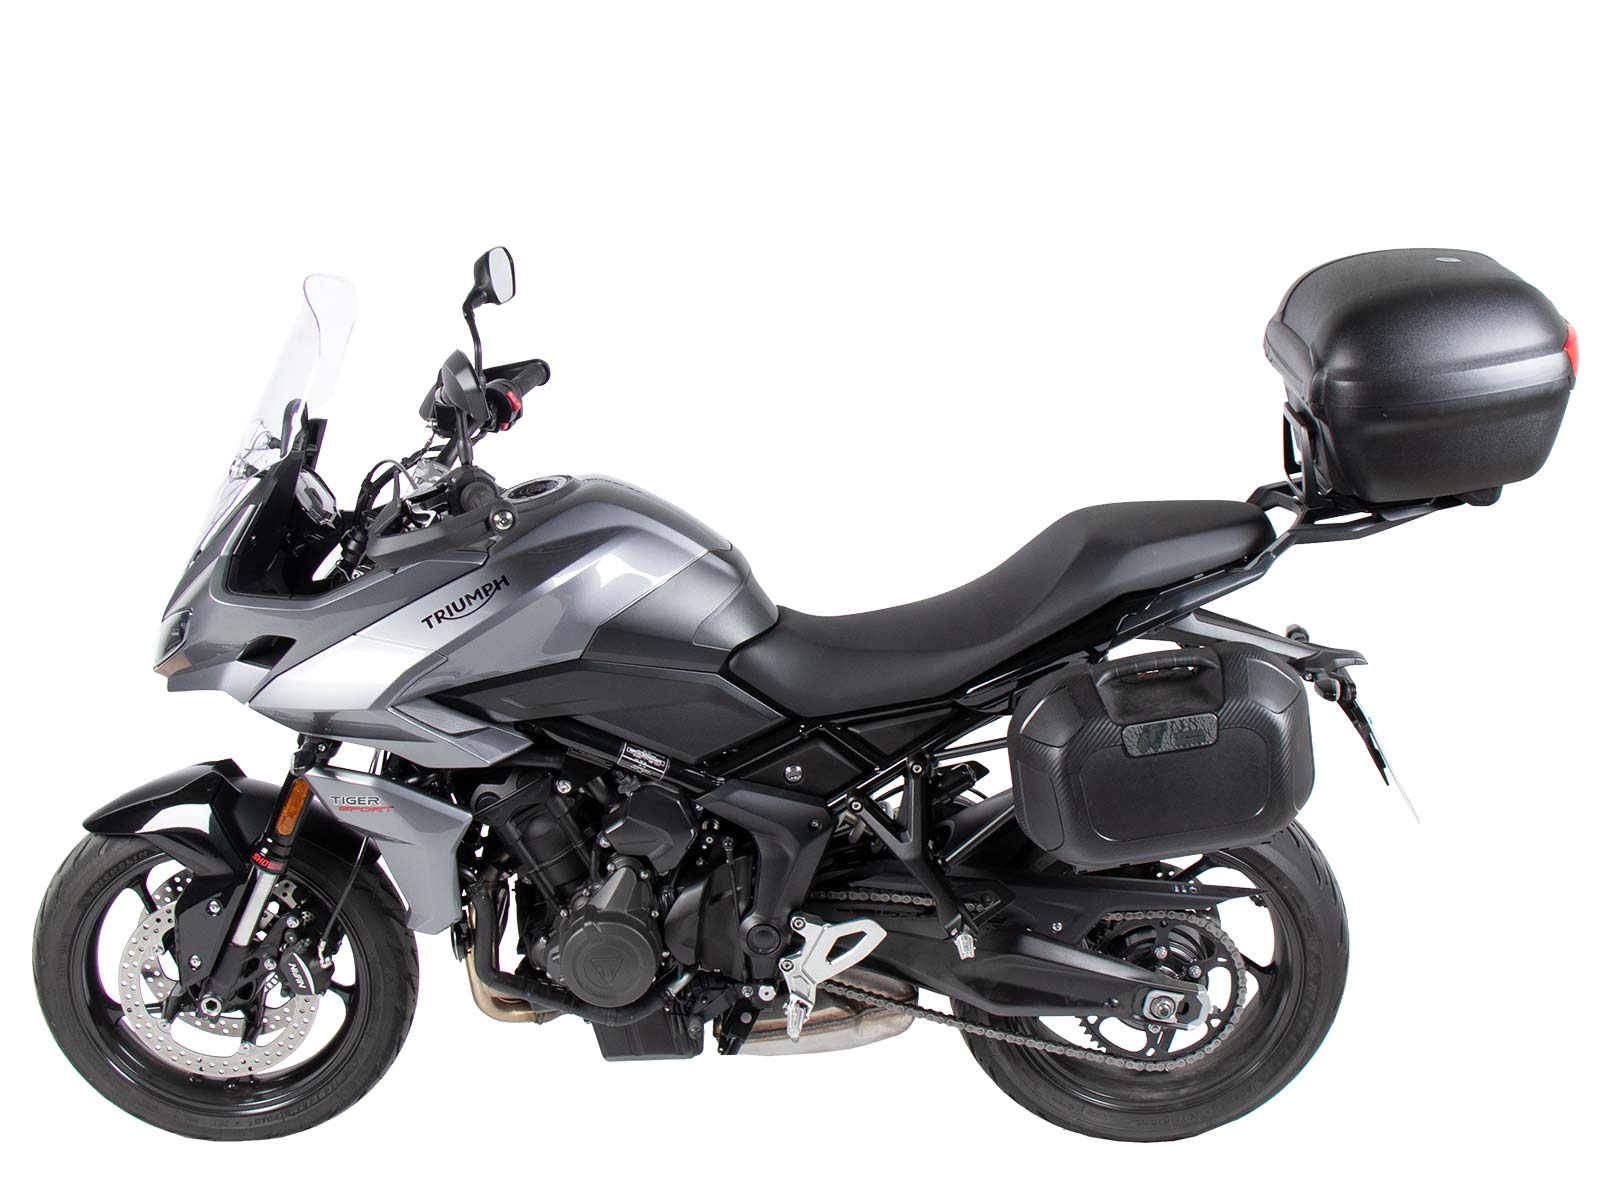 Alurack top case carrier black for combination with original rear rack for Triumph Tiger Sport 660 (2022-)